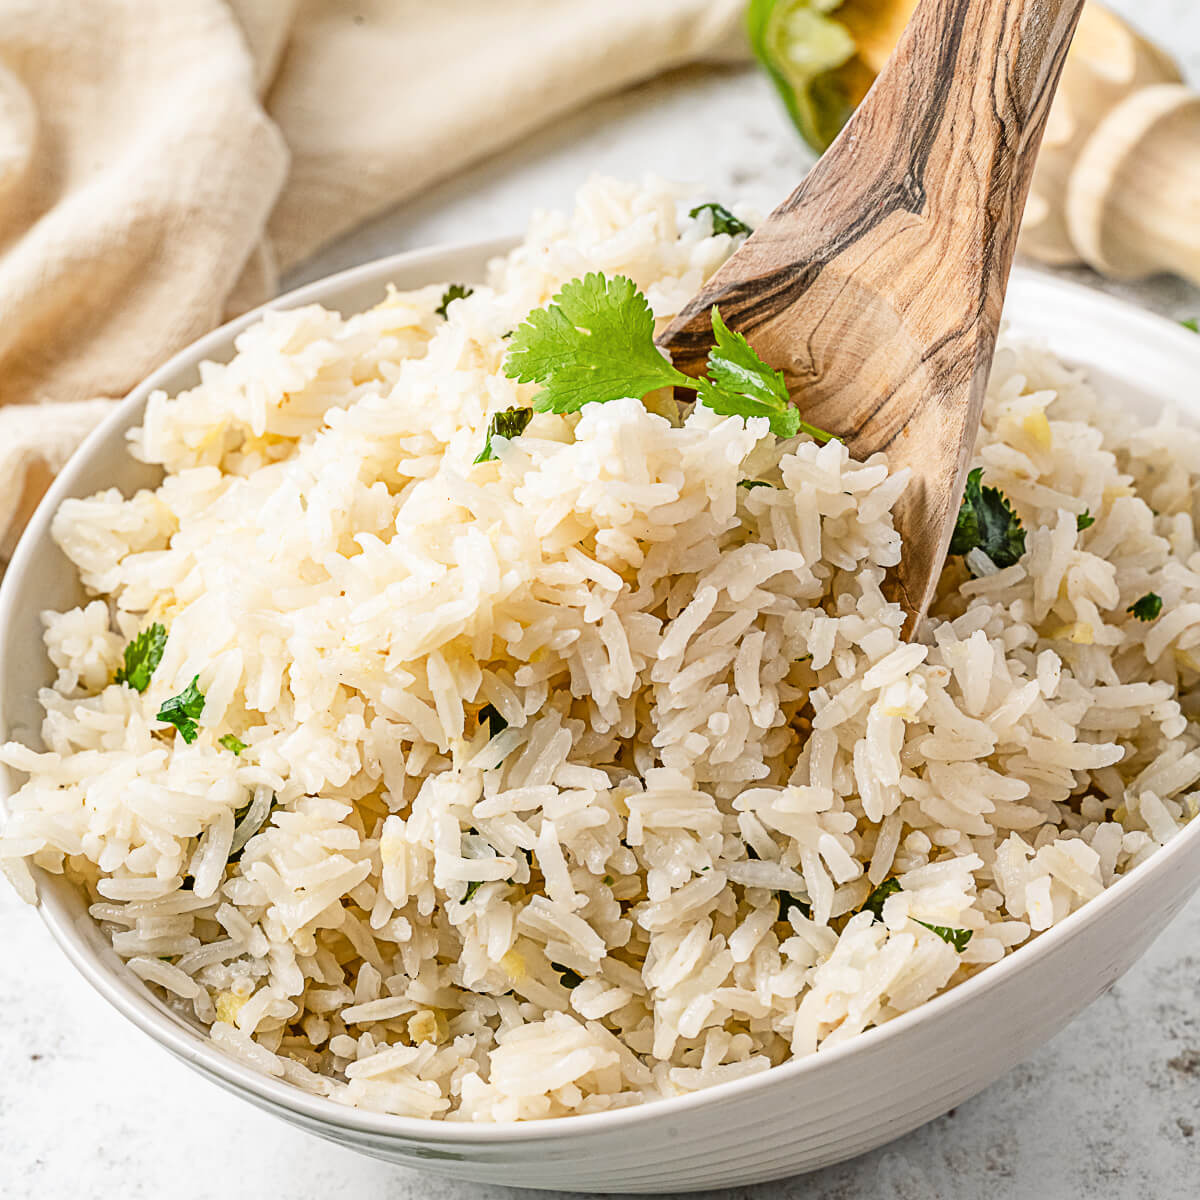 A wooden spoon sits in a white bowl filled with Ginger Rice garnished with chopped cilantro.